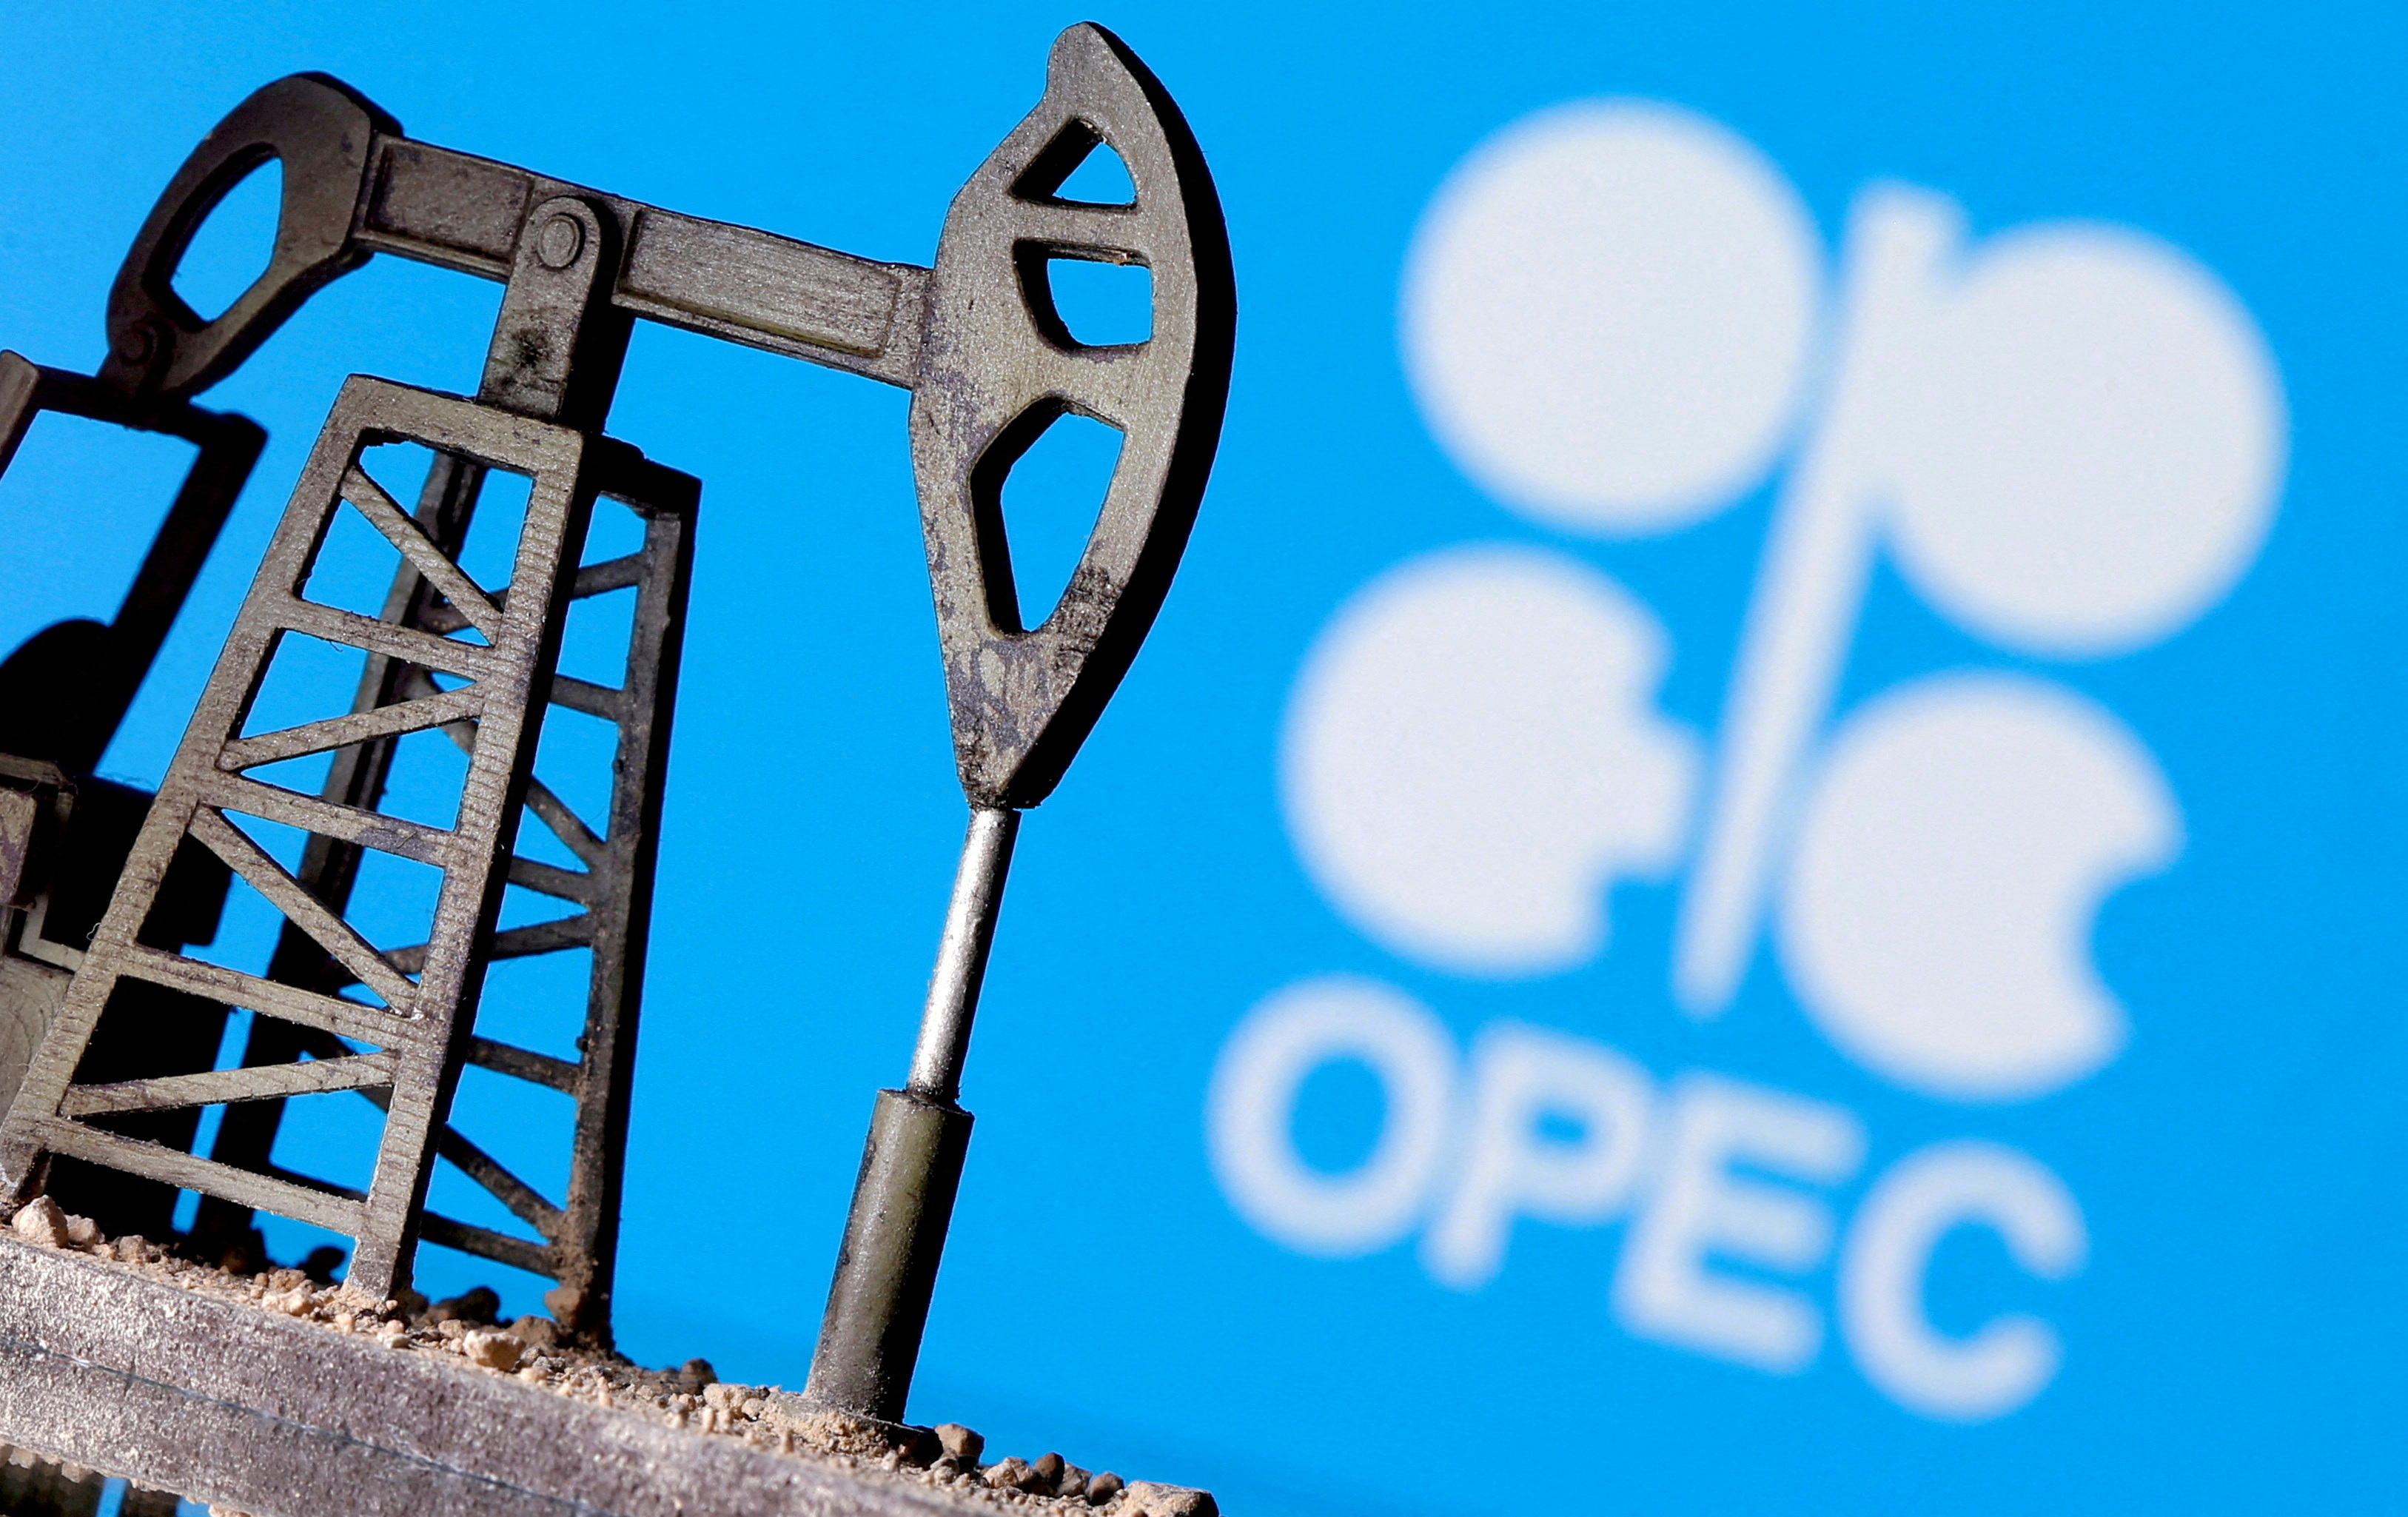 image OPEC+ agrees deep oil production cuts, Biden calls it shortsighted